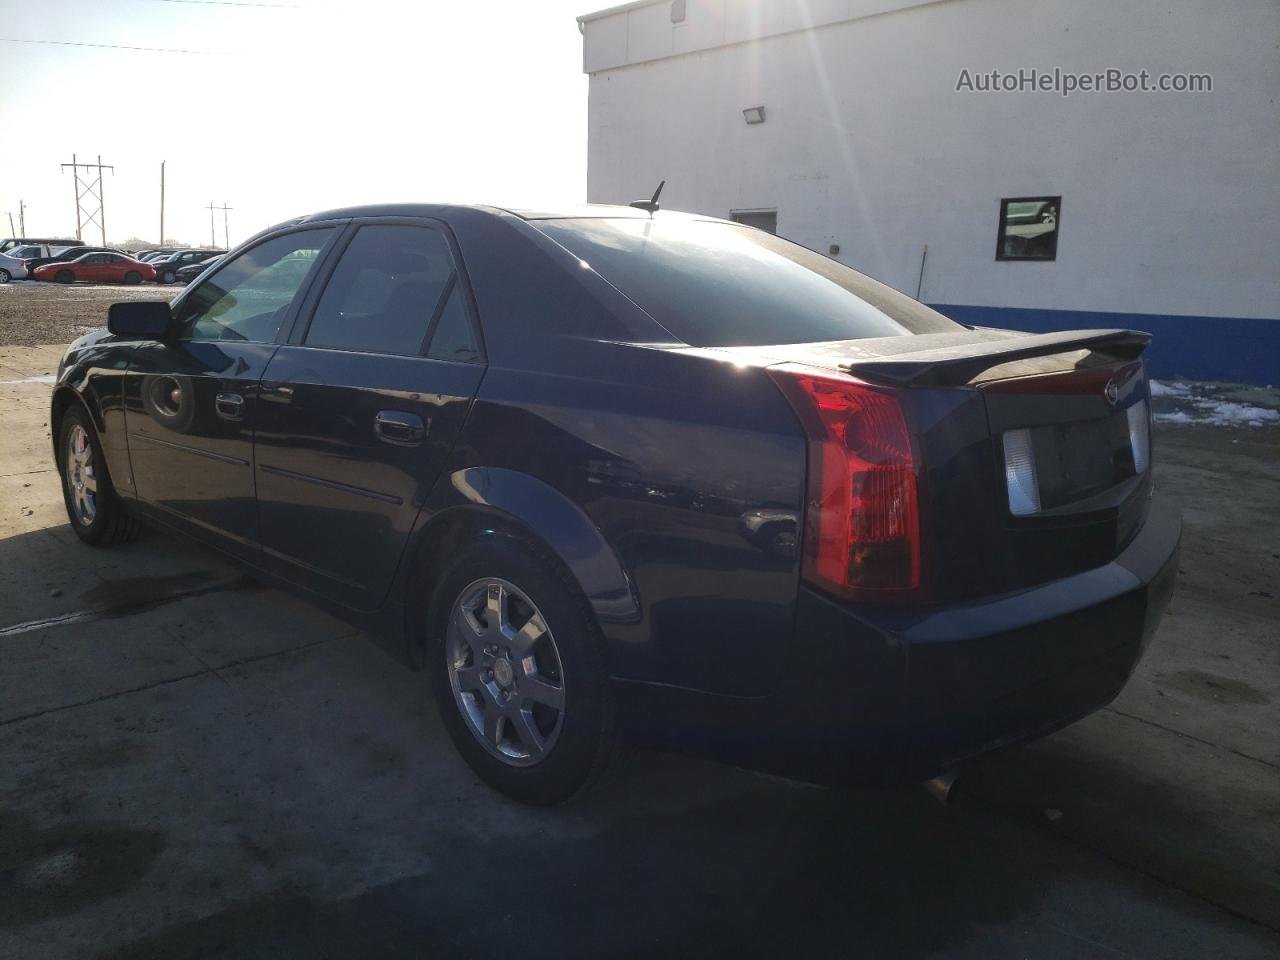 Price & History 2007 Cadillac Cts Hi Feature V6 3.6l 6 vin